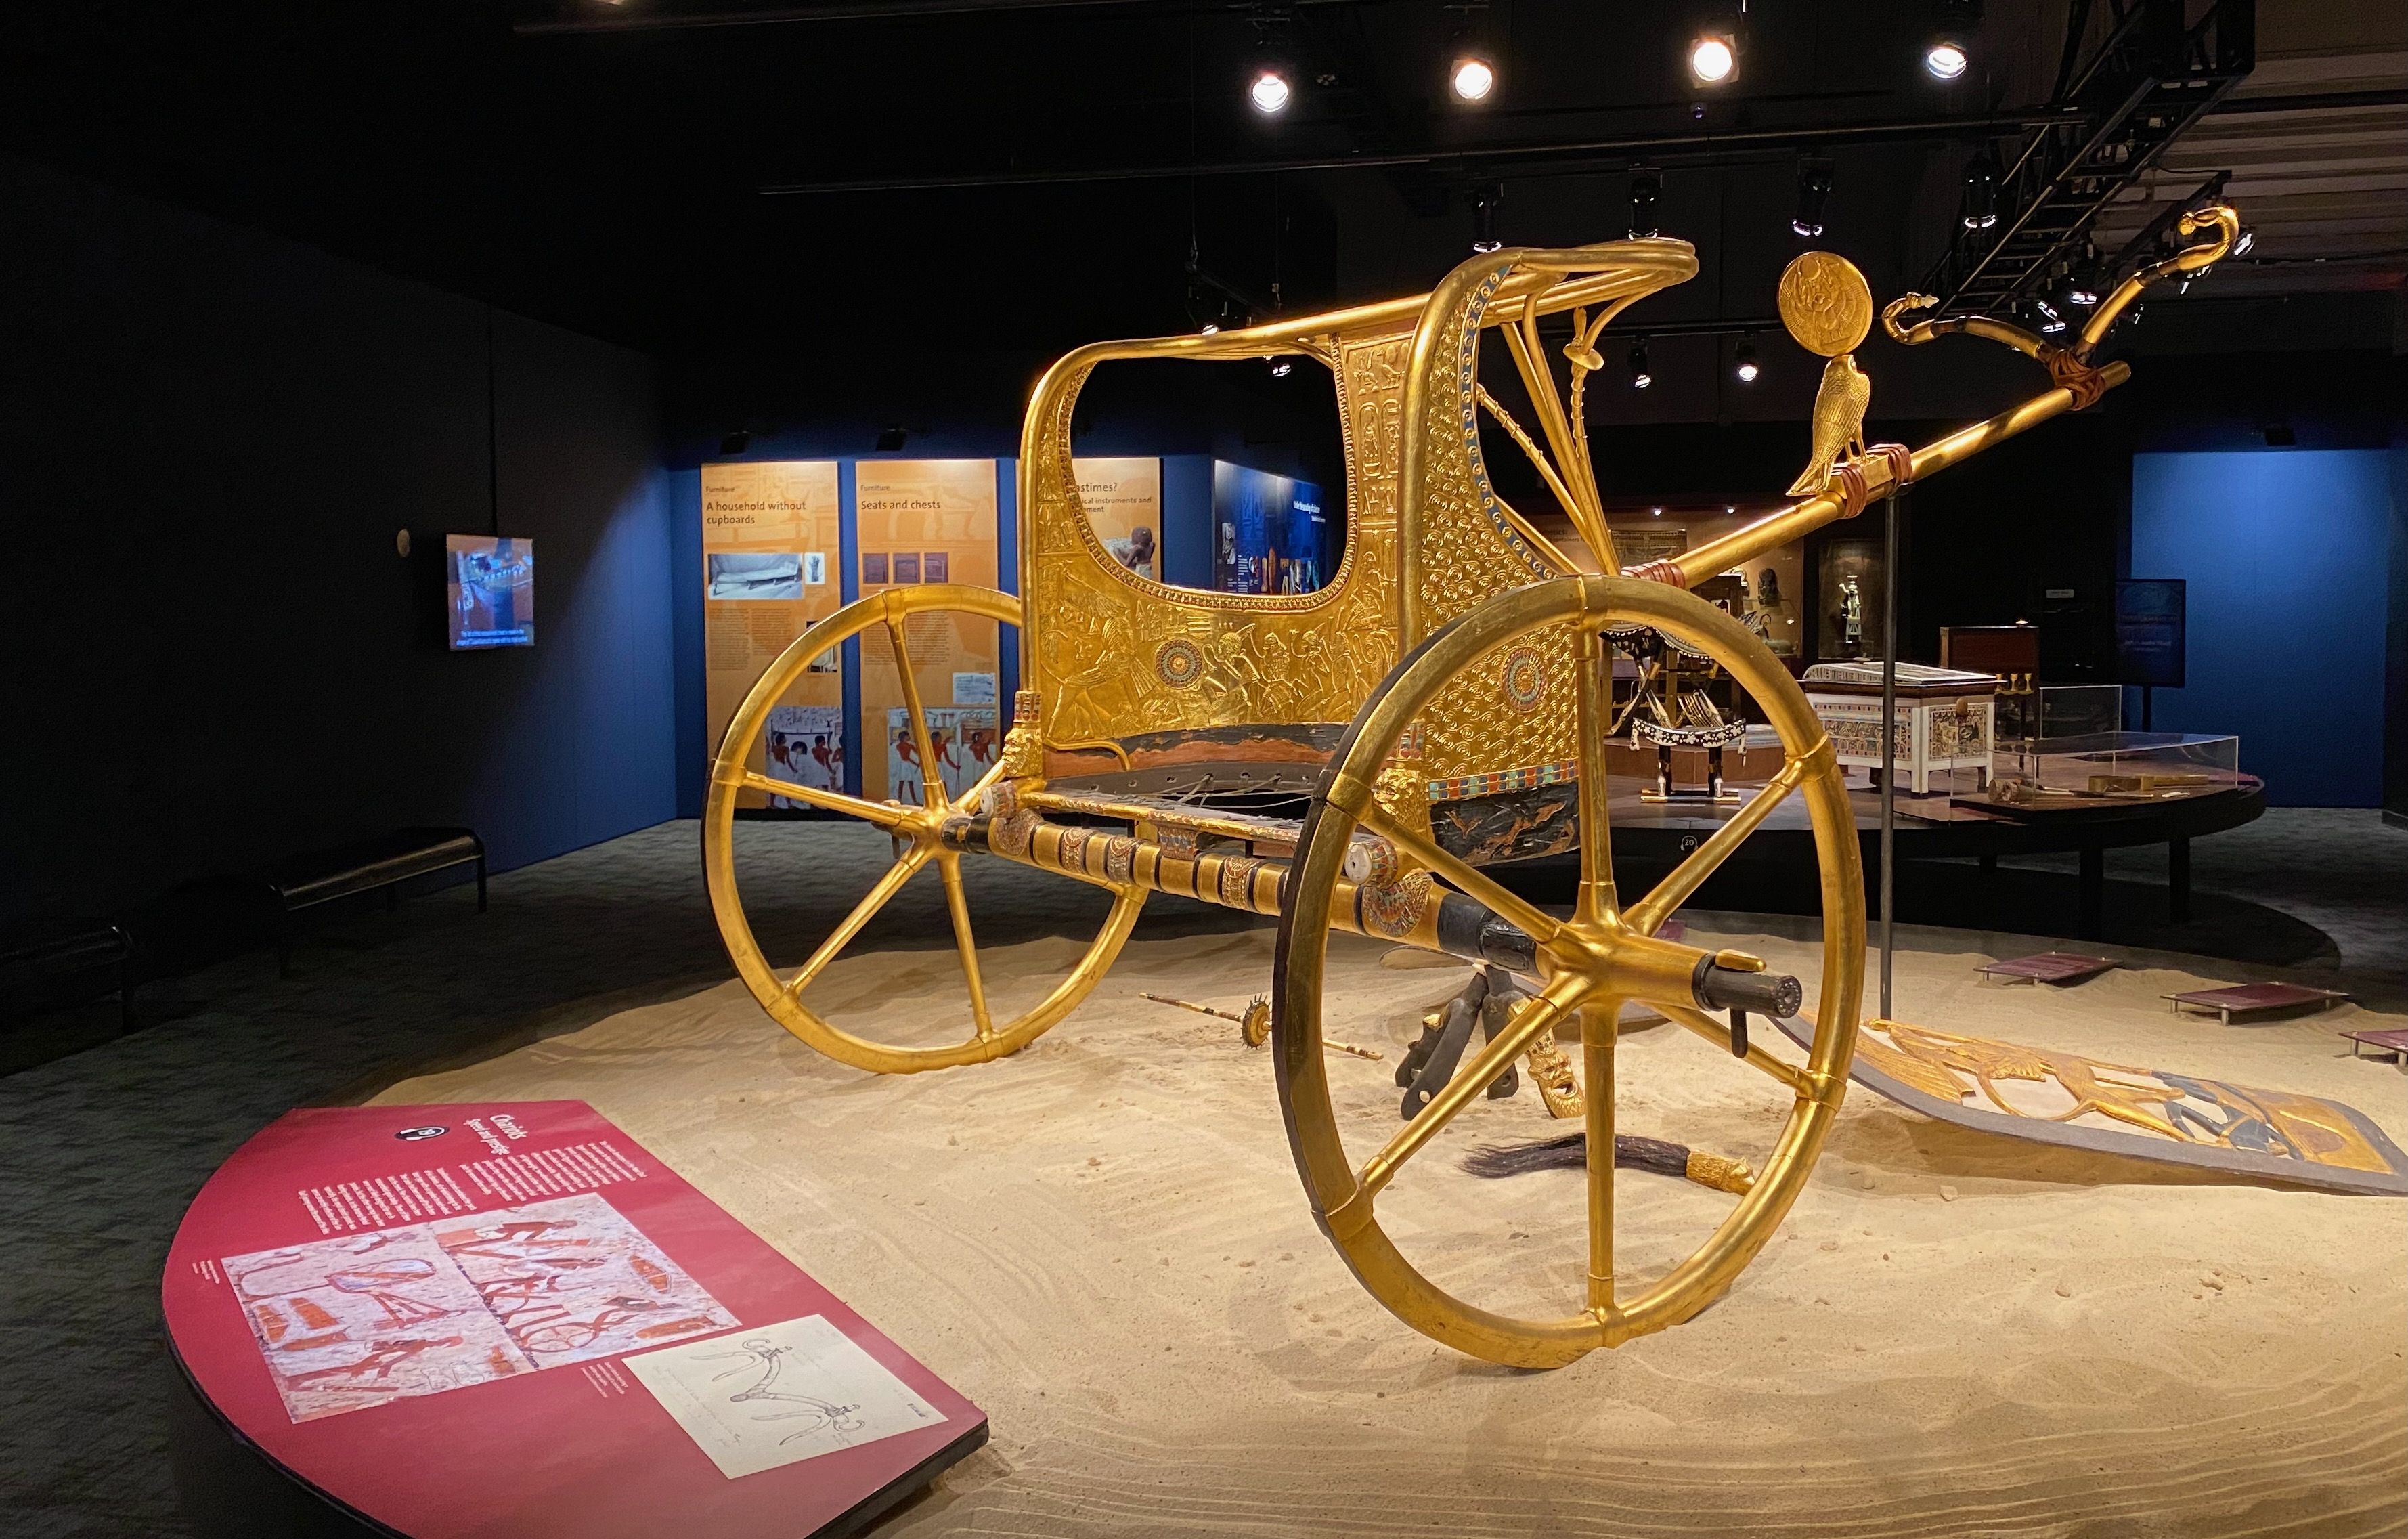 A replica of one of six gold chariots found in Tutankhamun's tomb